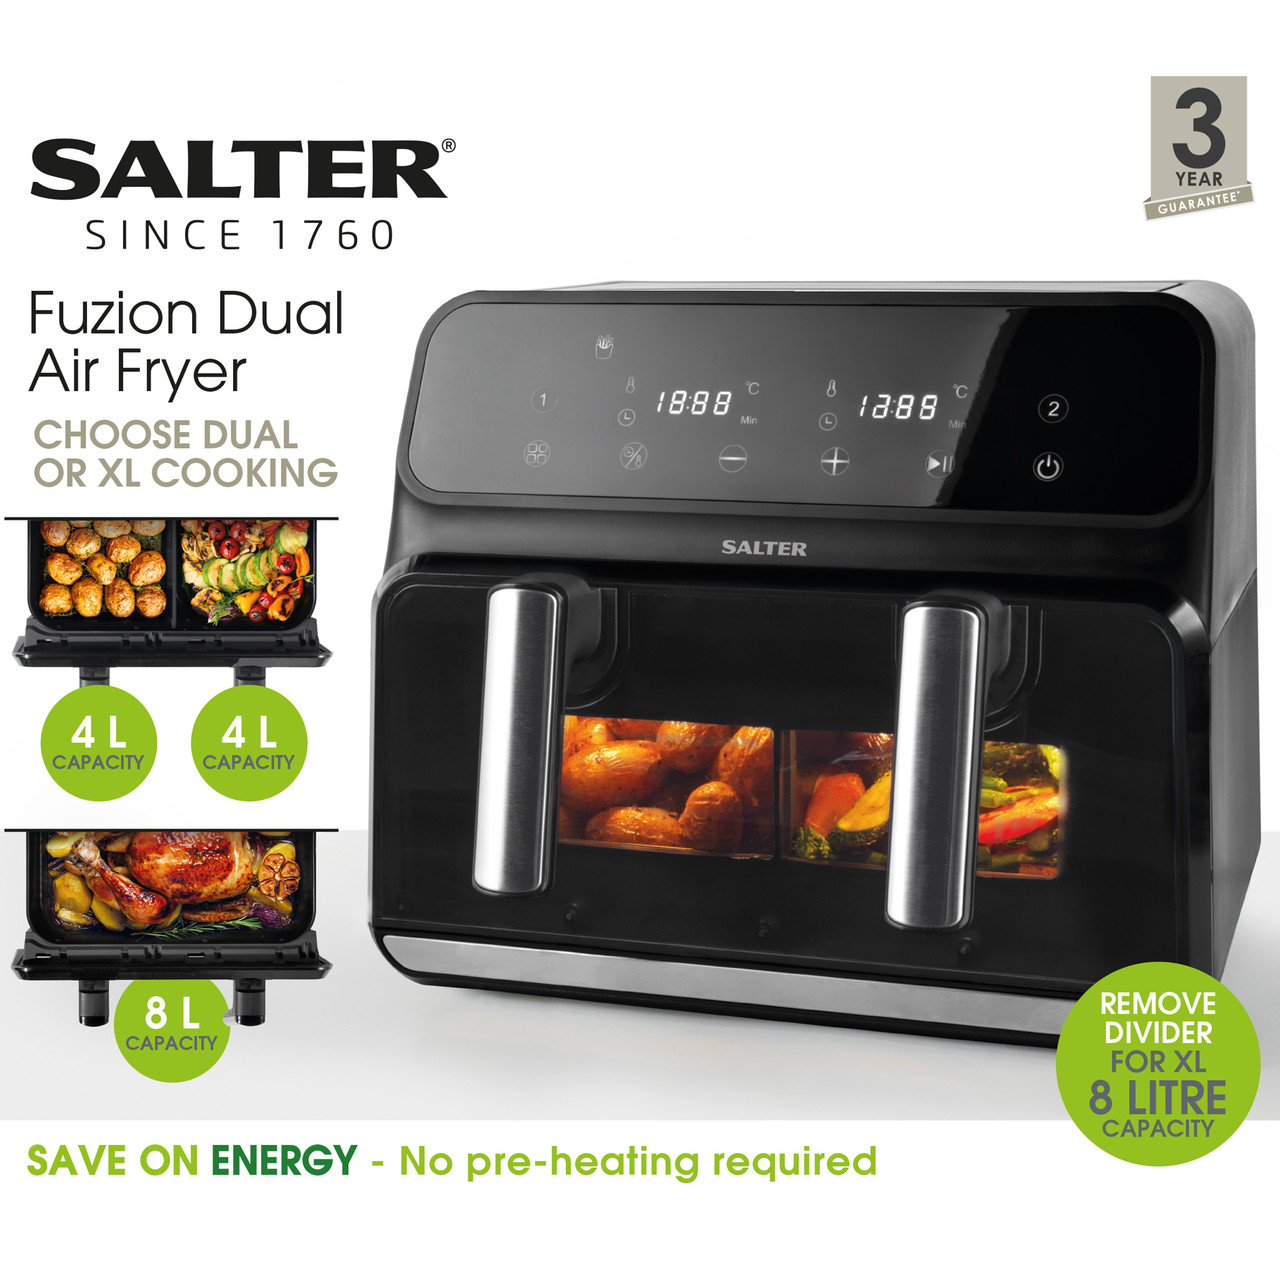 Fuzion Dual air fryer with removable divider